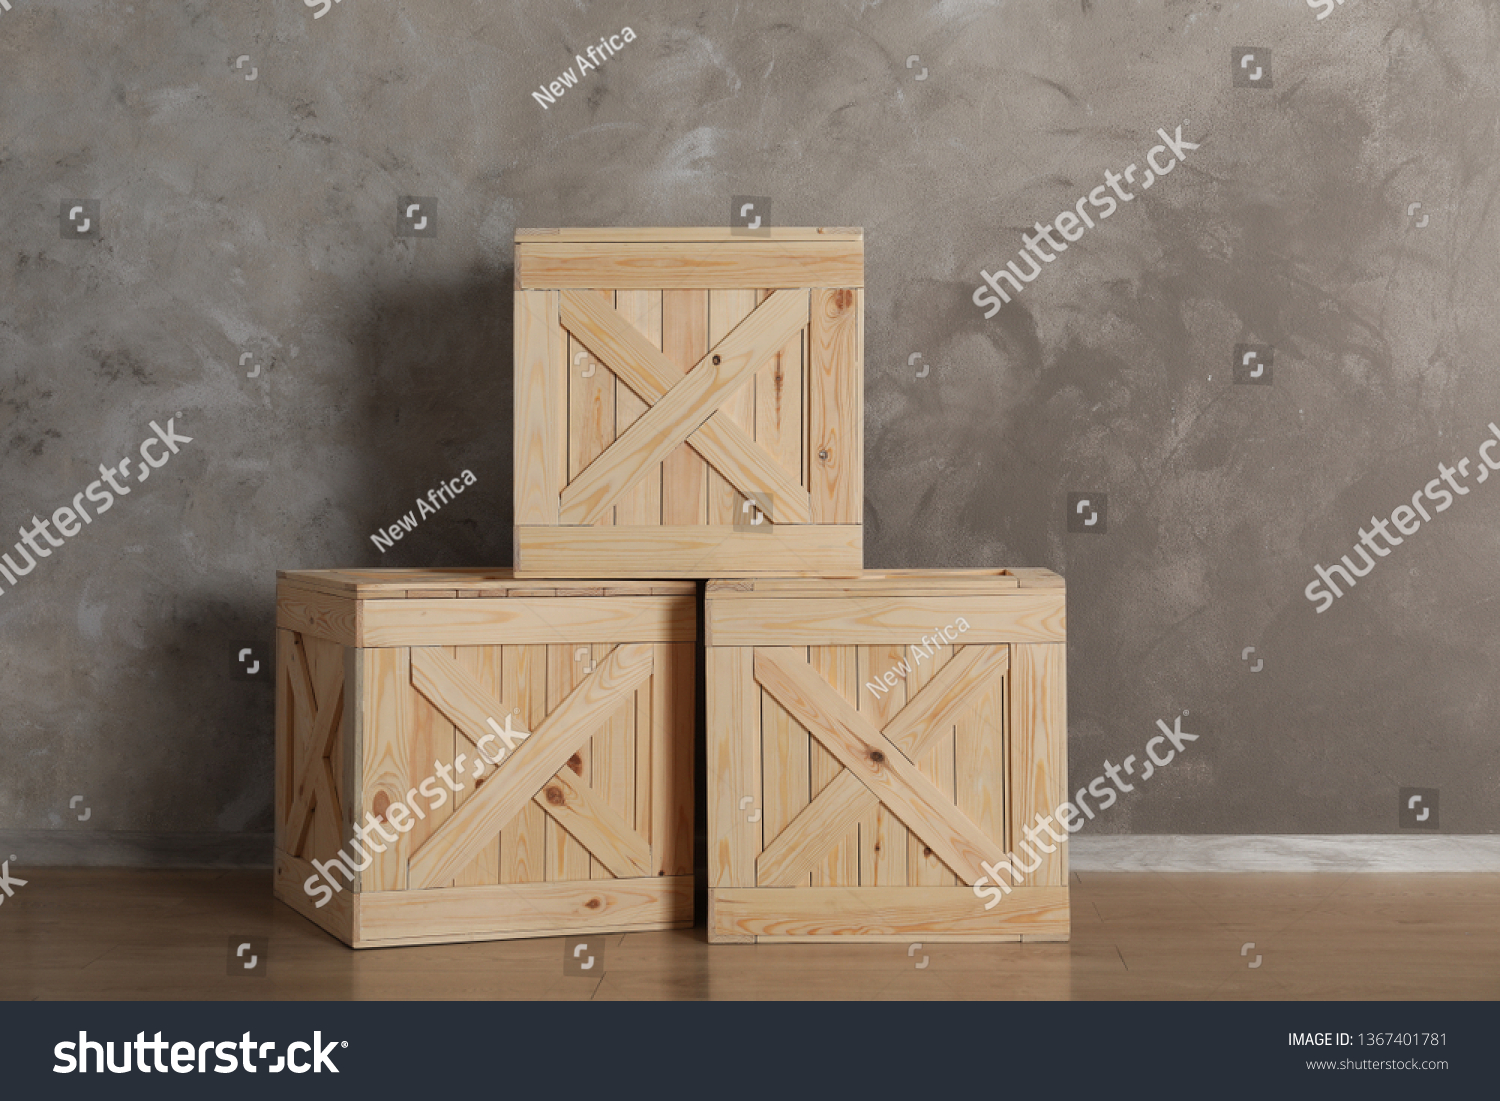 Wooden crates on floor against color background, space for text #1367401781